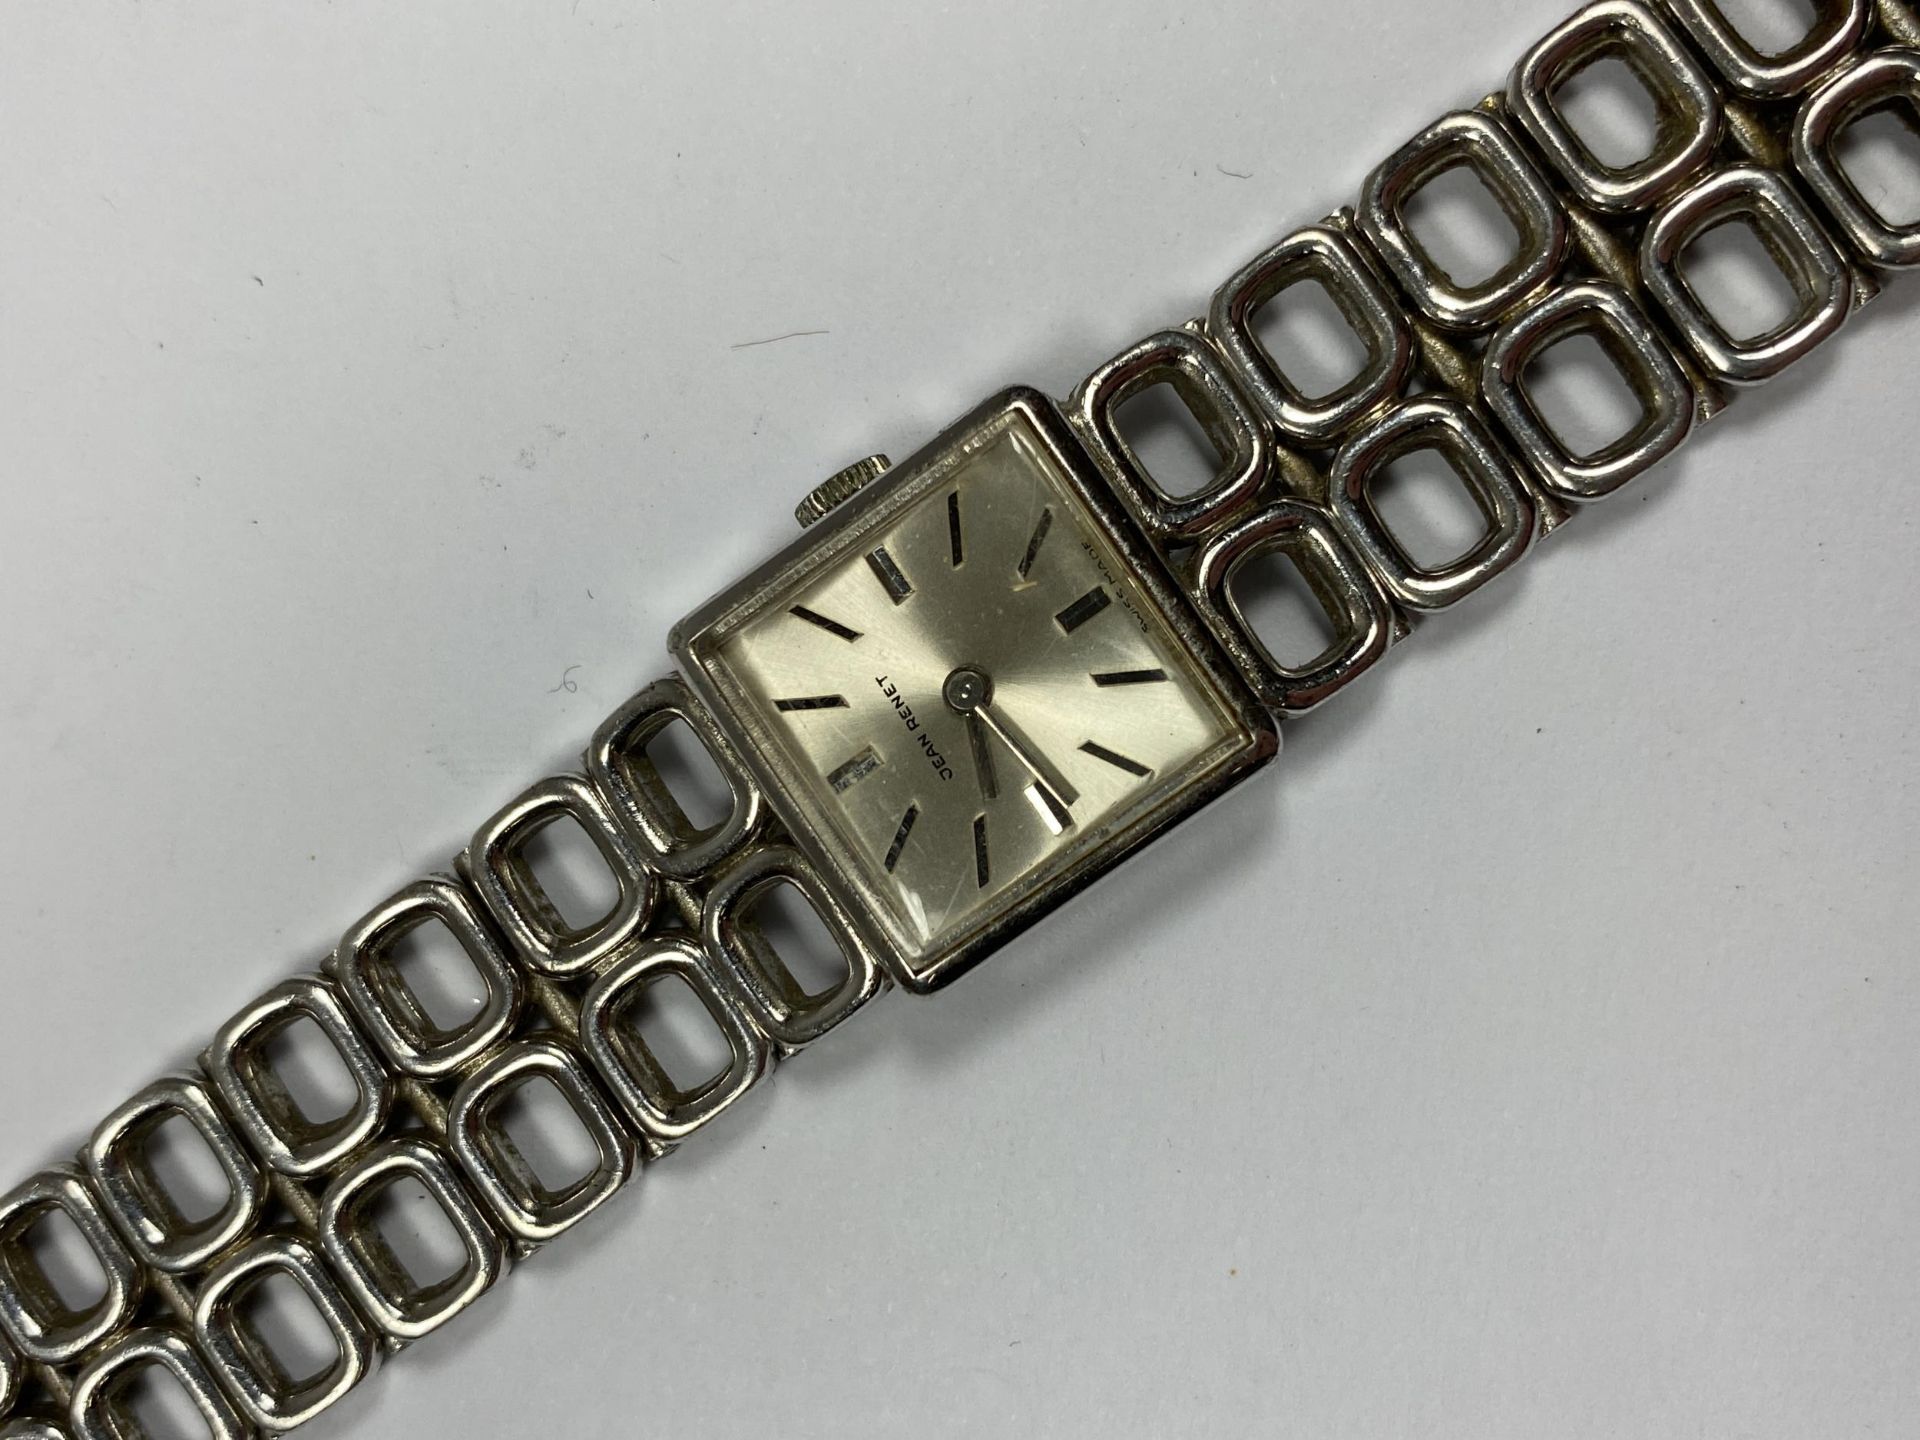 A JEAN RENET SWISS LADIES WATCH WITH HALLMARKED SILVER STRAP - Image 2 of 4